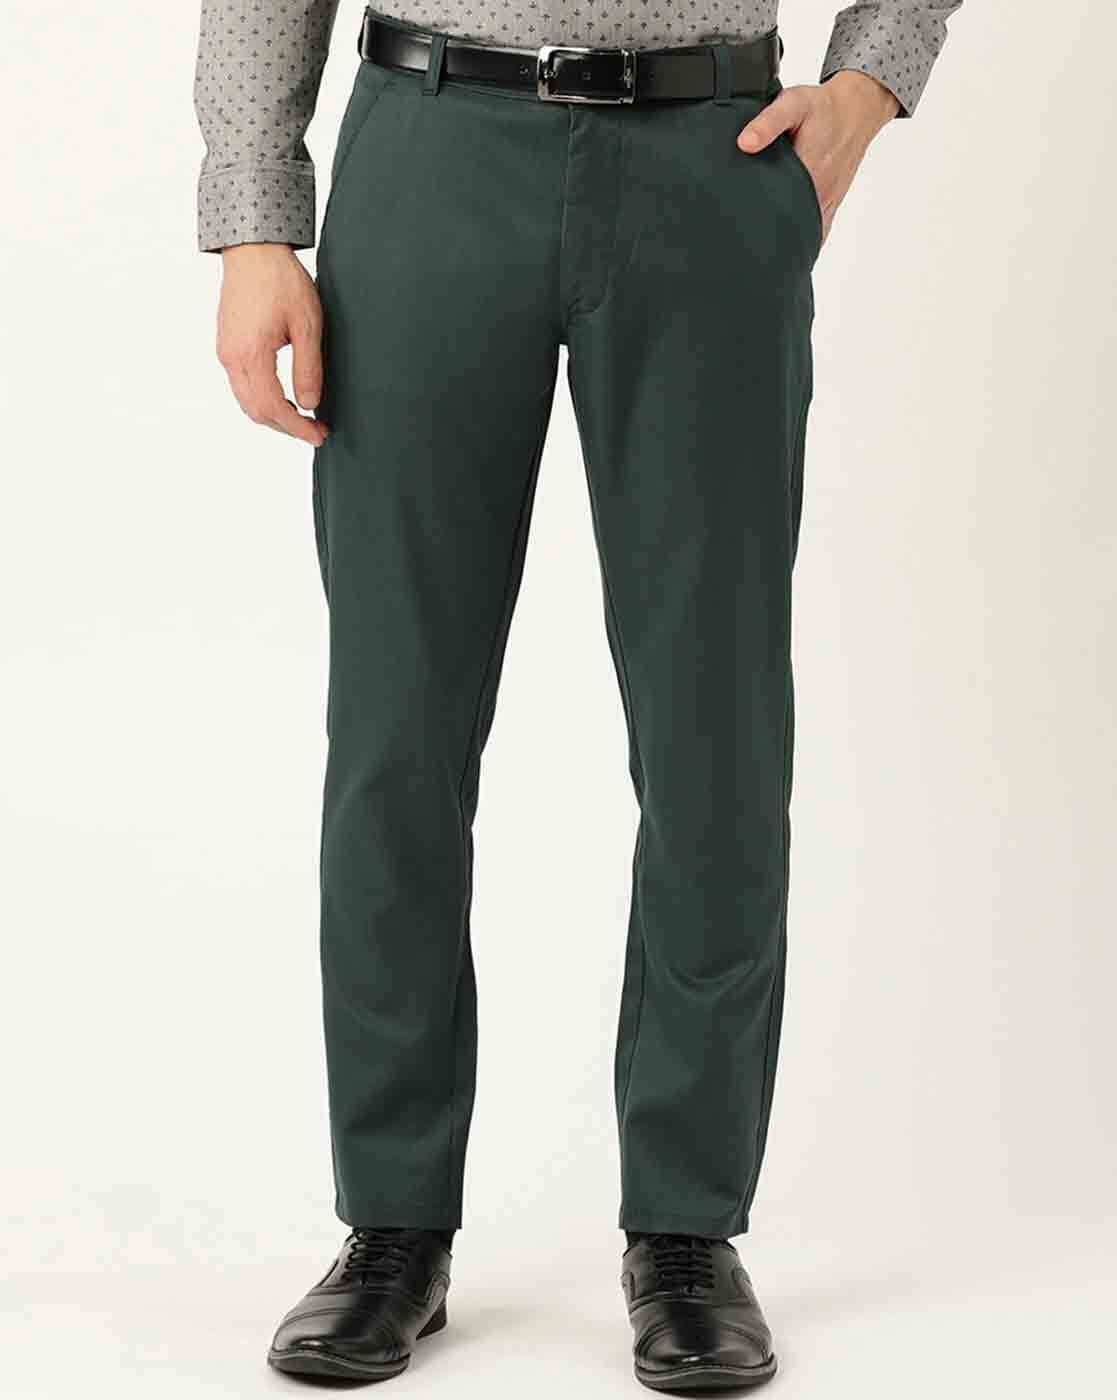 J.Crew Men's December 2016 Style Guide | Smart casual outfit, J crew men, Green  trousers outfit